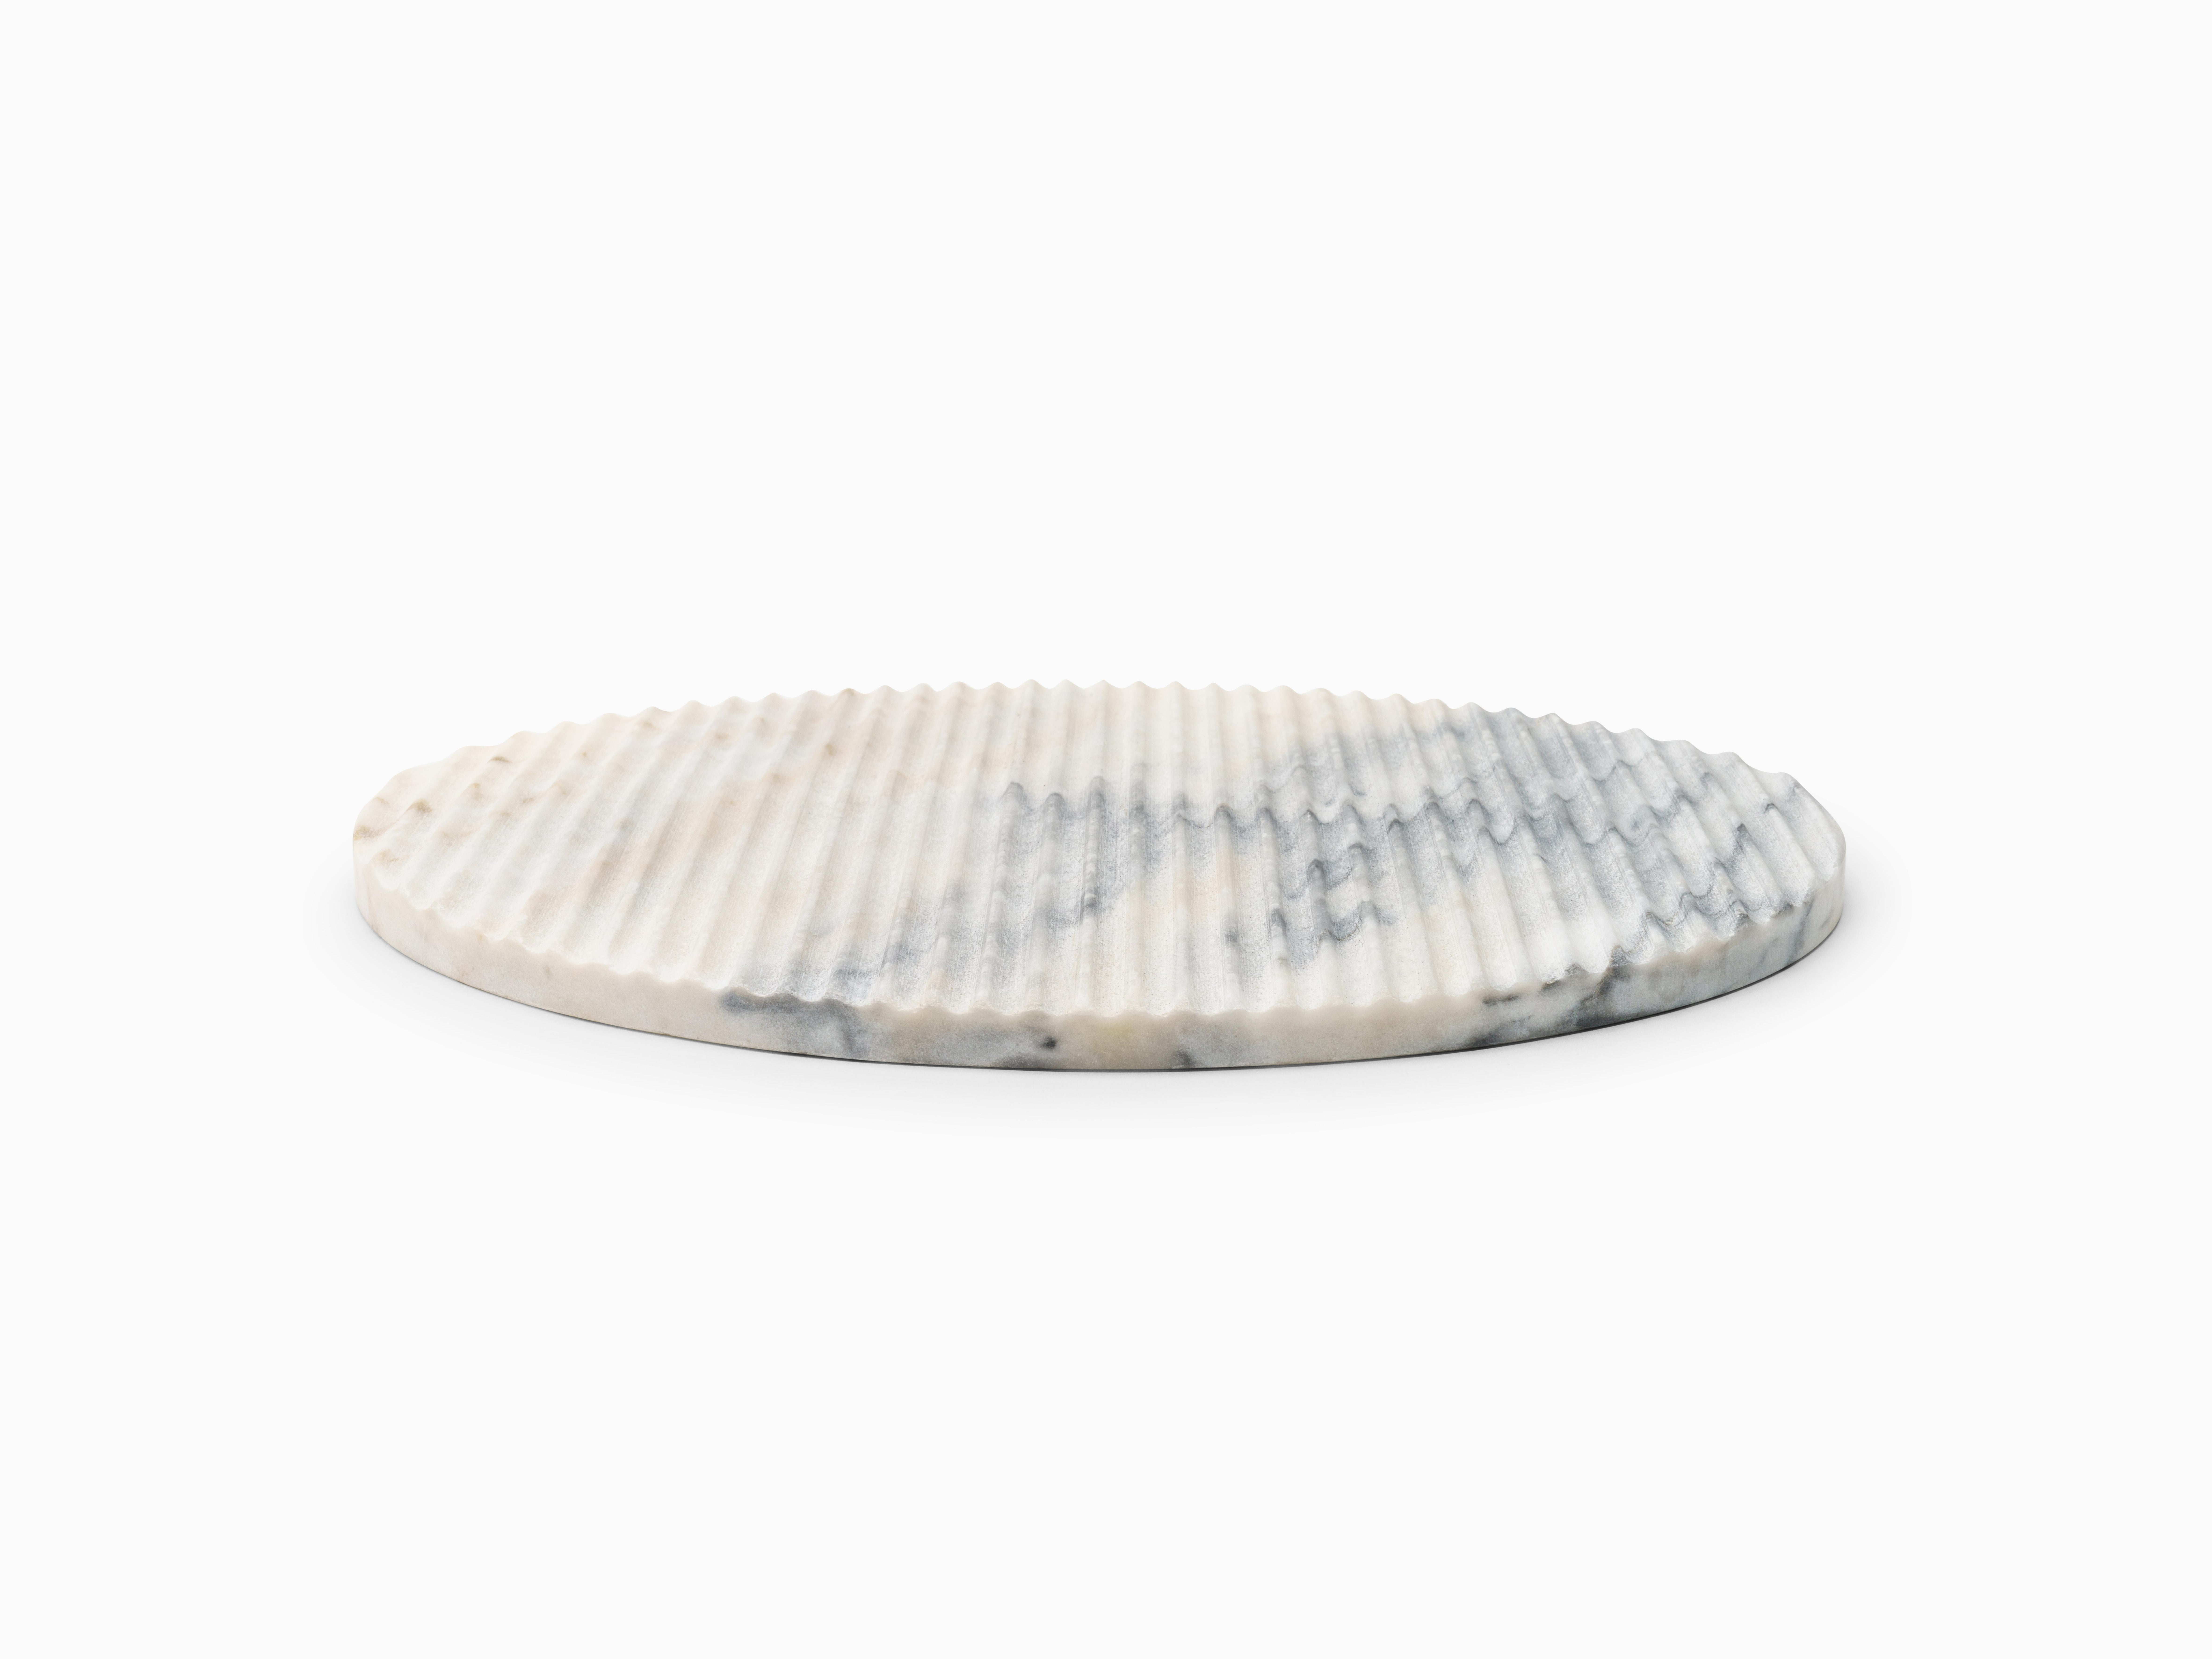 Manuel Aires Mateus creates four elegant stone platters inspired by a simple, circular shape, with beautiful Estremoz marble stone grooved in a classic pattern. Its unique look is achieved by placing vertical grooves carved in its pristine surface,